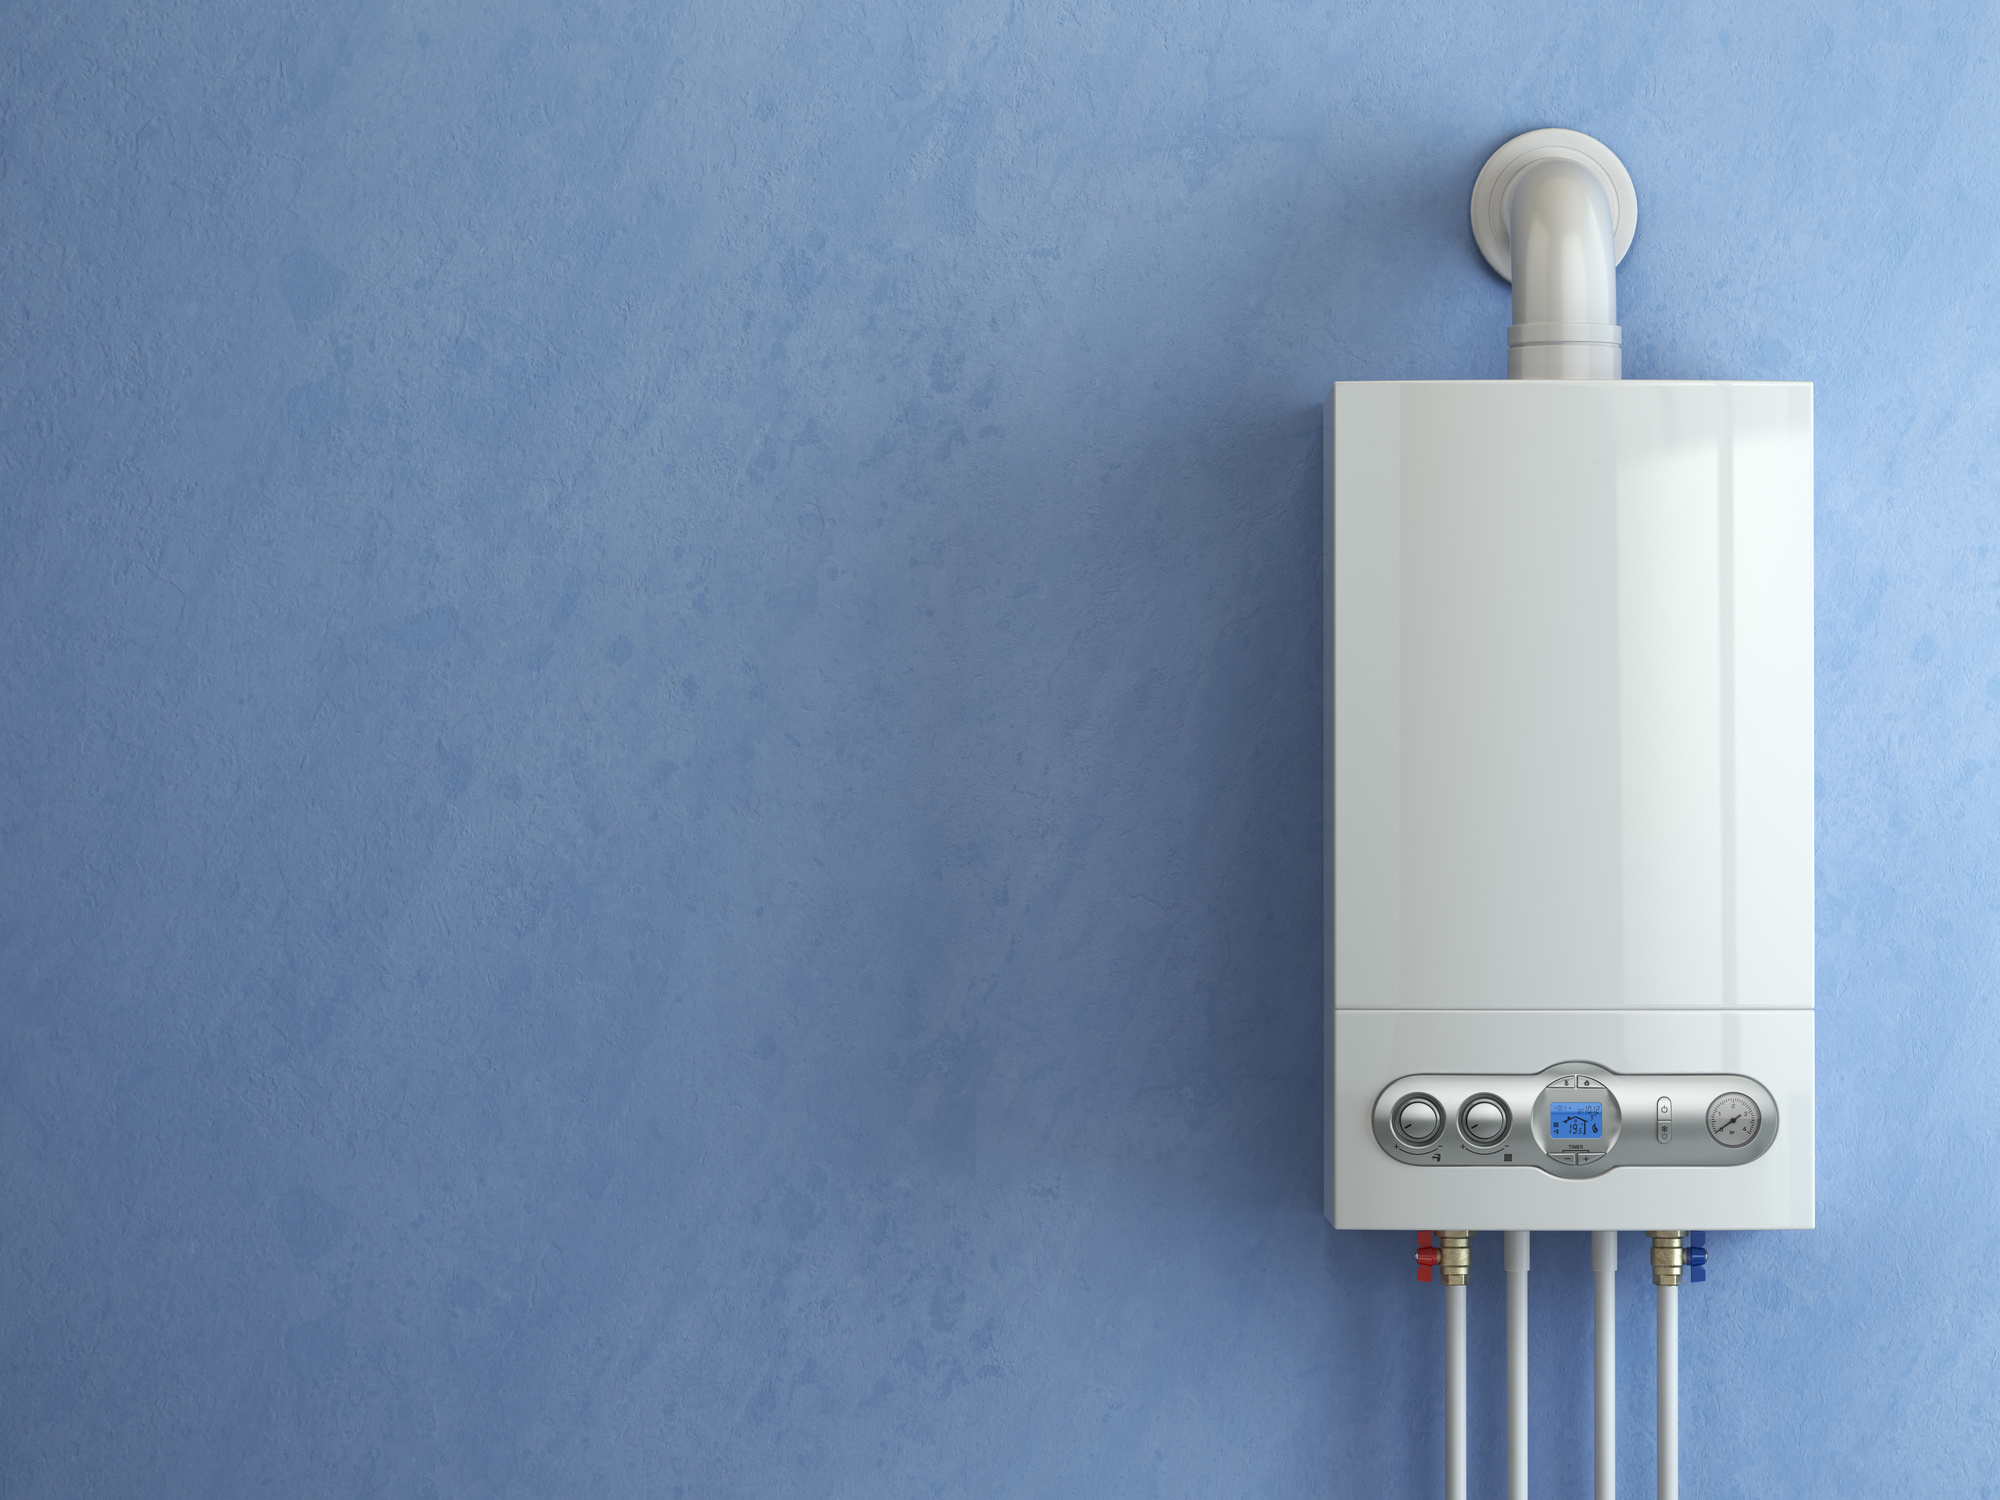 That's Explosive! What to Do When You See Your Water Heater Burst?